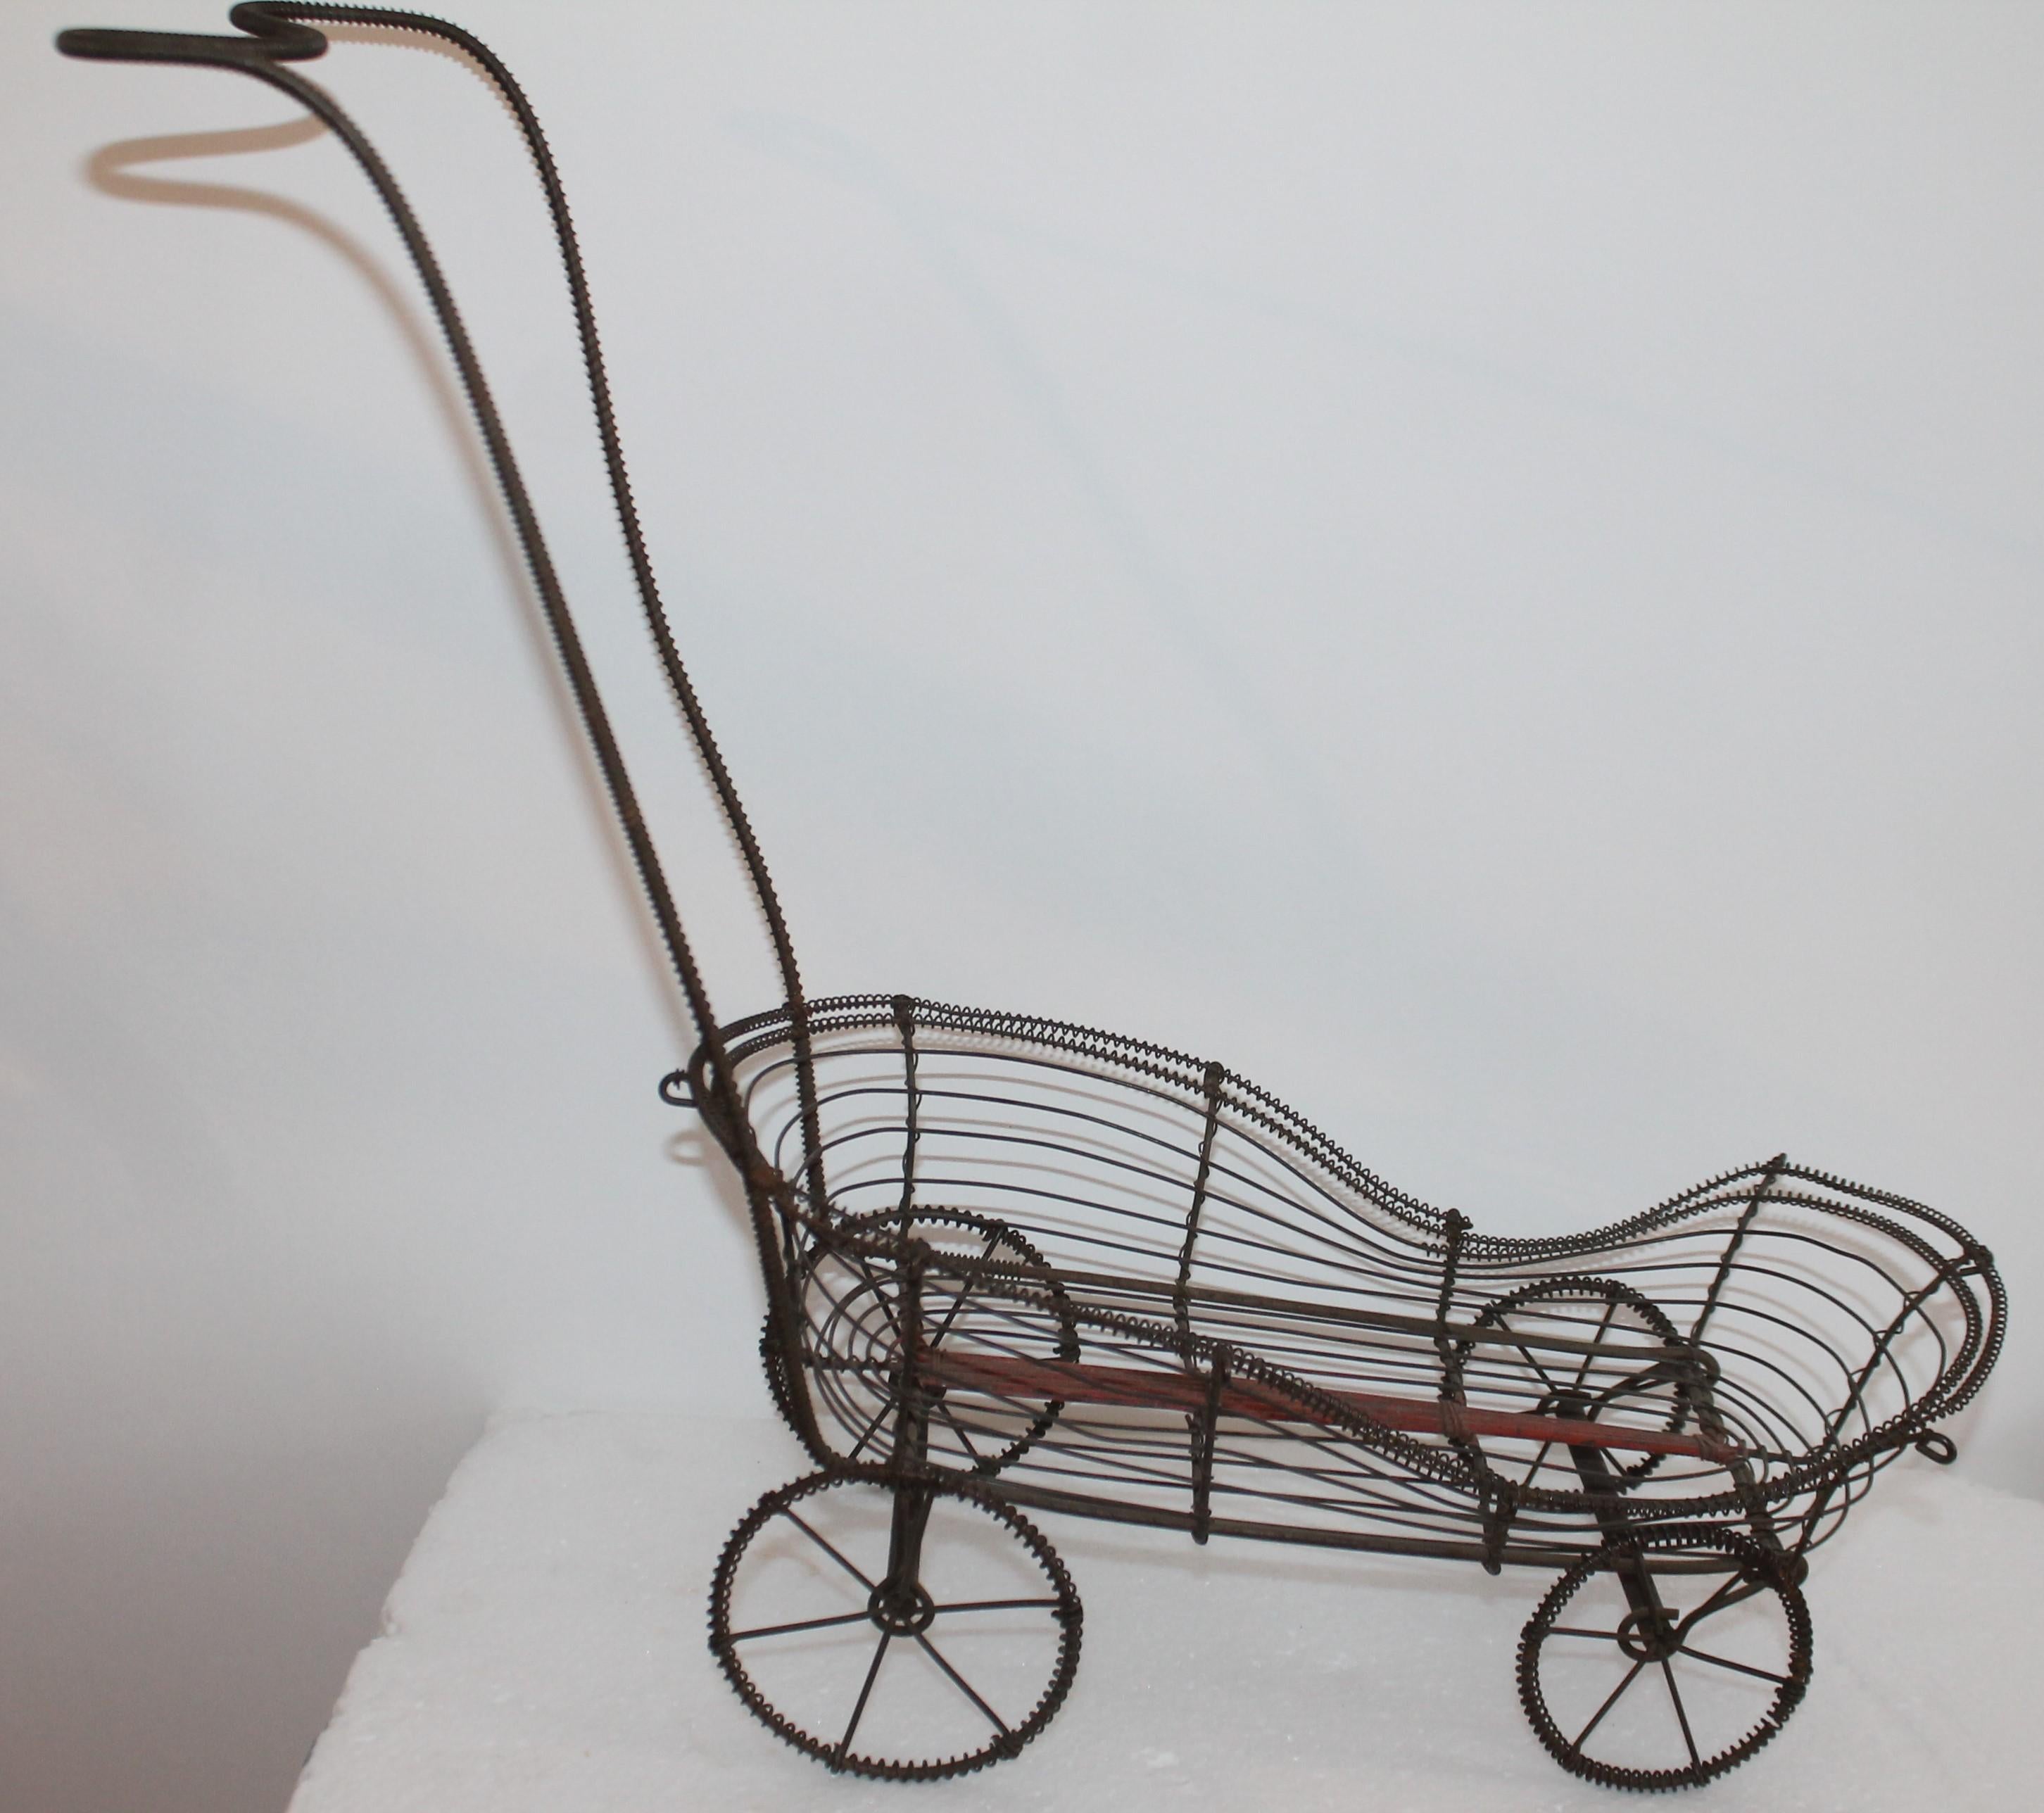 This fine folky handcrafted wire doll or teddy bear buggy is in fine condition and workable order. The wheels work and you can use this child's doll buggy.